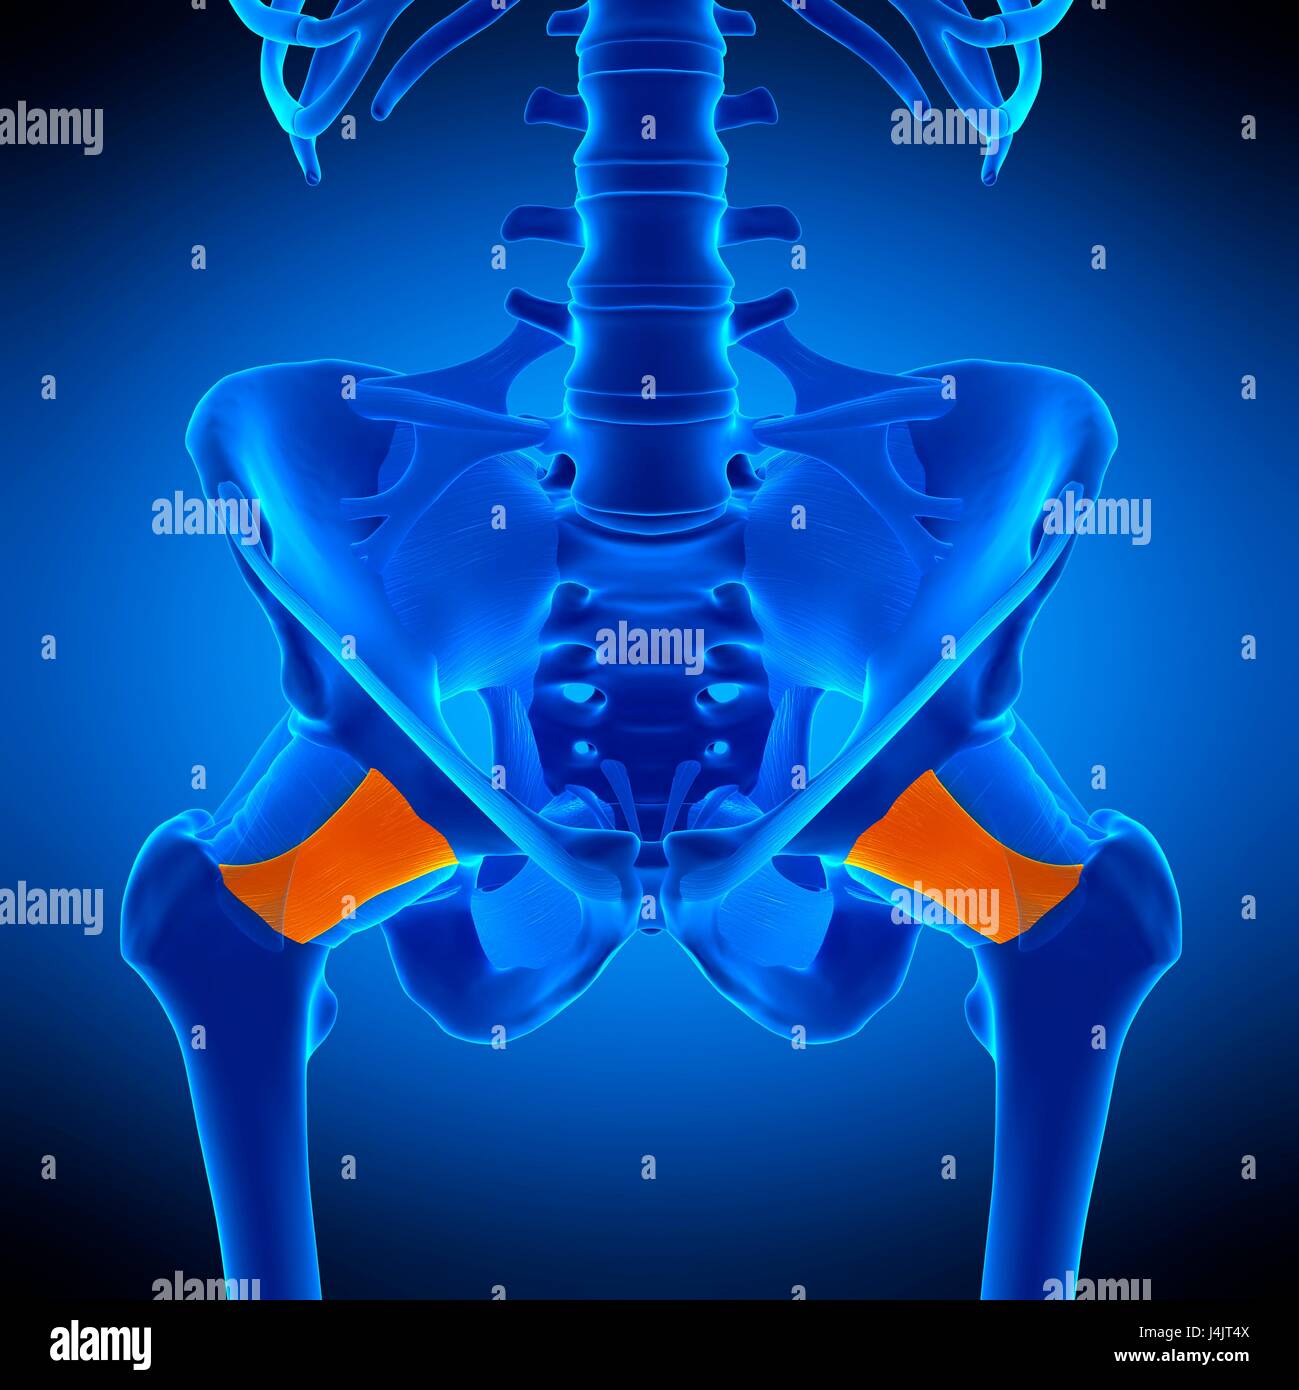 Illustration of the pubofemoral ligament. Stock Photo